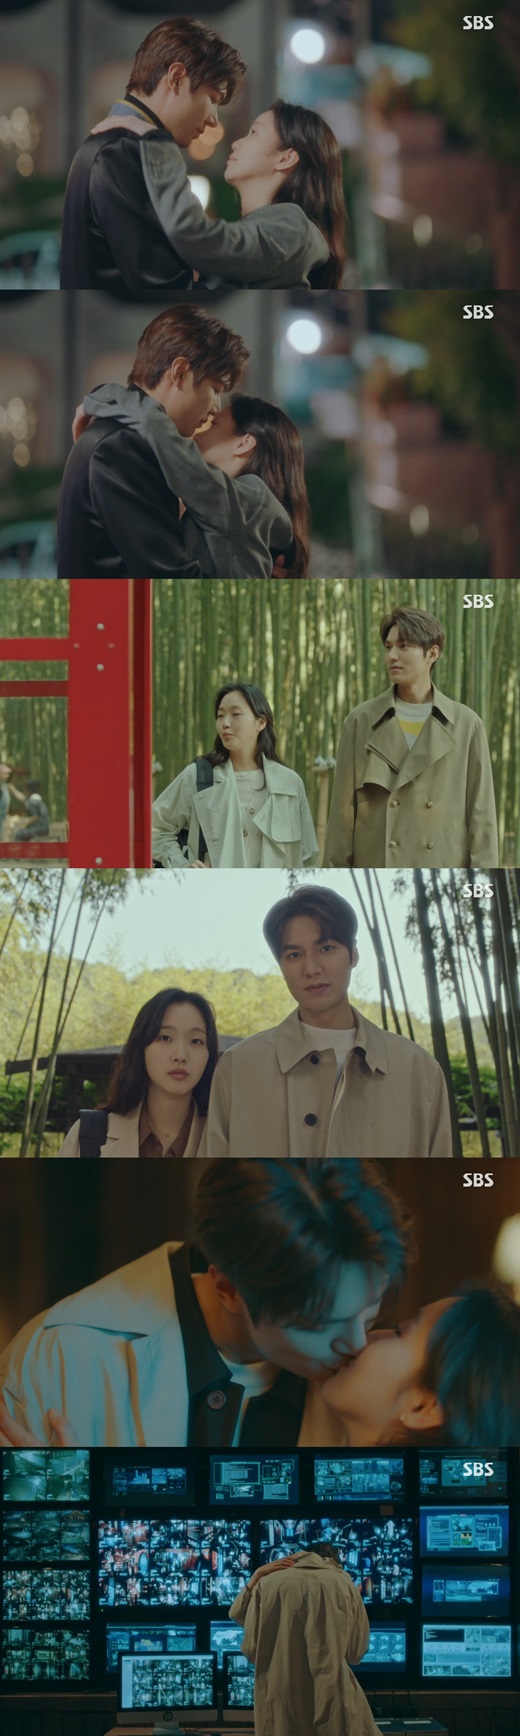 The King Lee Min-ho and Kim Go-eun found their own happiness in different worlds.In the last episode of SBS The King: Monarch of Eternity, which was broadcast on the 12th, the story of those who want to correct the past was unfolded.Lee Min-ho returned to the past point, which was the first start to prevent Lee Jung-jin; Kim Go-eun also monitored Lee Rim in time and space.However, Irim has a broken and unbroken mampa style, and Igon, Irim, and Jeongtae are all in the past space.Irim said, If you turn your grandfathers world back, you lose all the memory of this.The brilliant memory remained in the middle of the day. In the past, Worlds Igon was at odds with Irim, who at once realized he was an adult. Igon swung the knife, saying, I behead the reverse Irim.The time of Jung Tae-eul in South Korea was about a week, and Lee Rim in parallel World was crippled. All the times went into place.Jung Tae-eul waited for Egon to come to see him in South Korea, who was looking for a lot of parallel worlds.Eventually the two reunited in South Korea.They met at different Worlds on weekends, and spent time on a normal date, careful not to encounter themselves on the same face.They went out to find happiness in their own way.